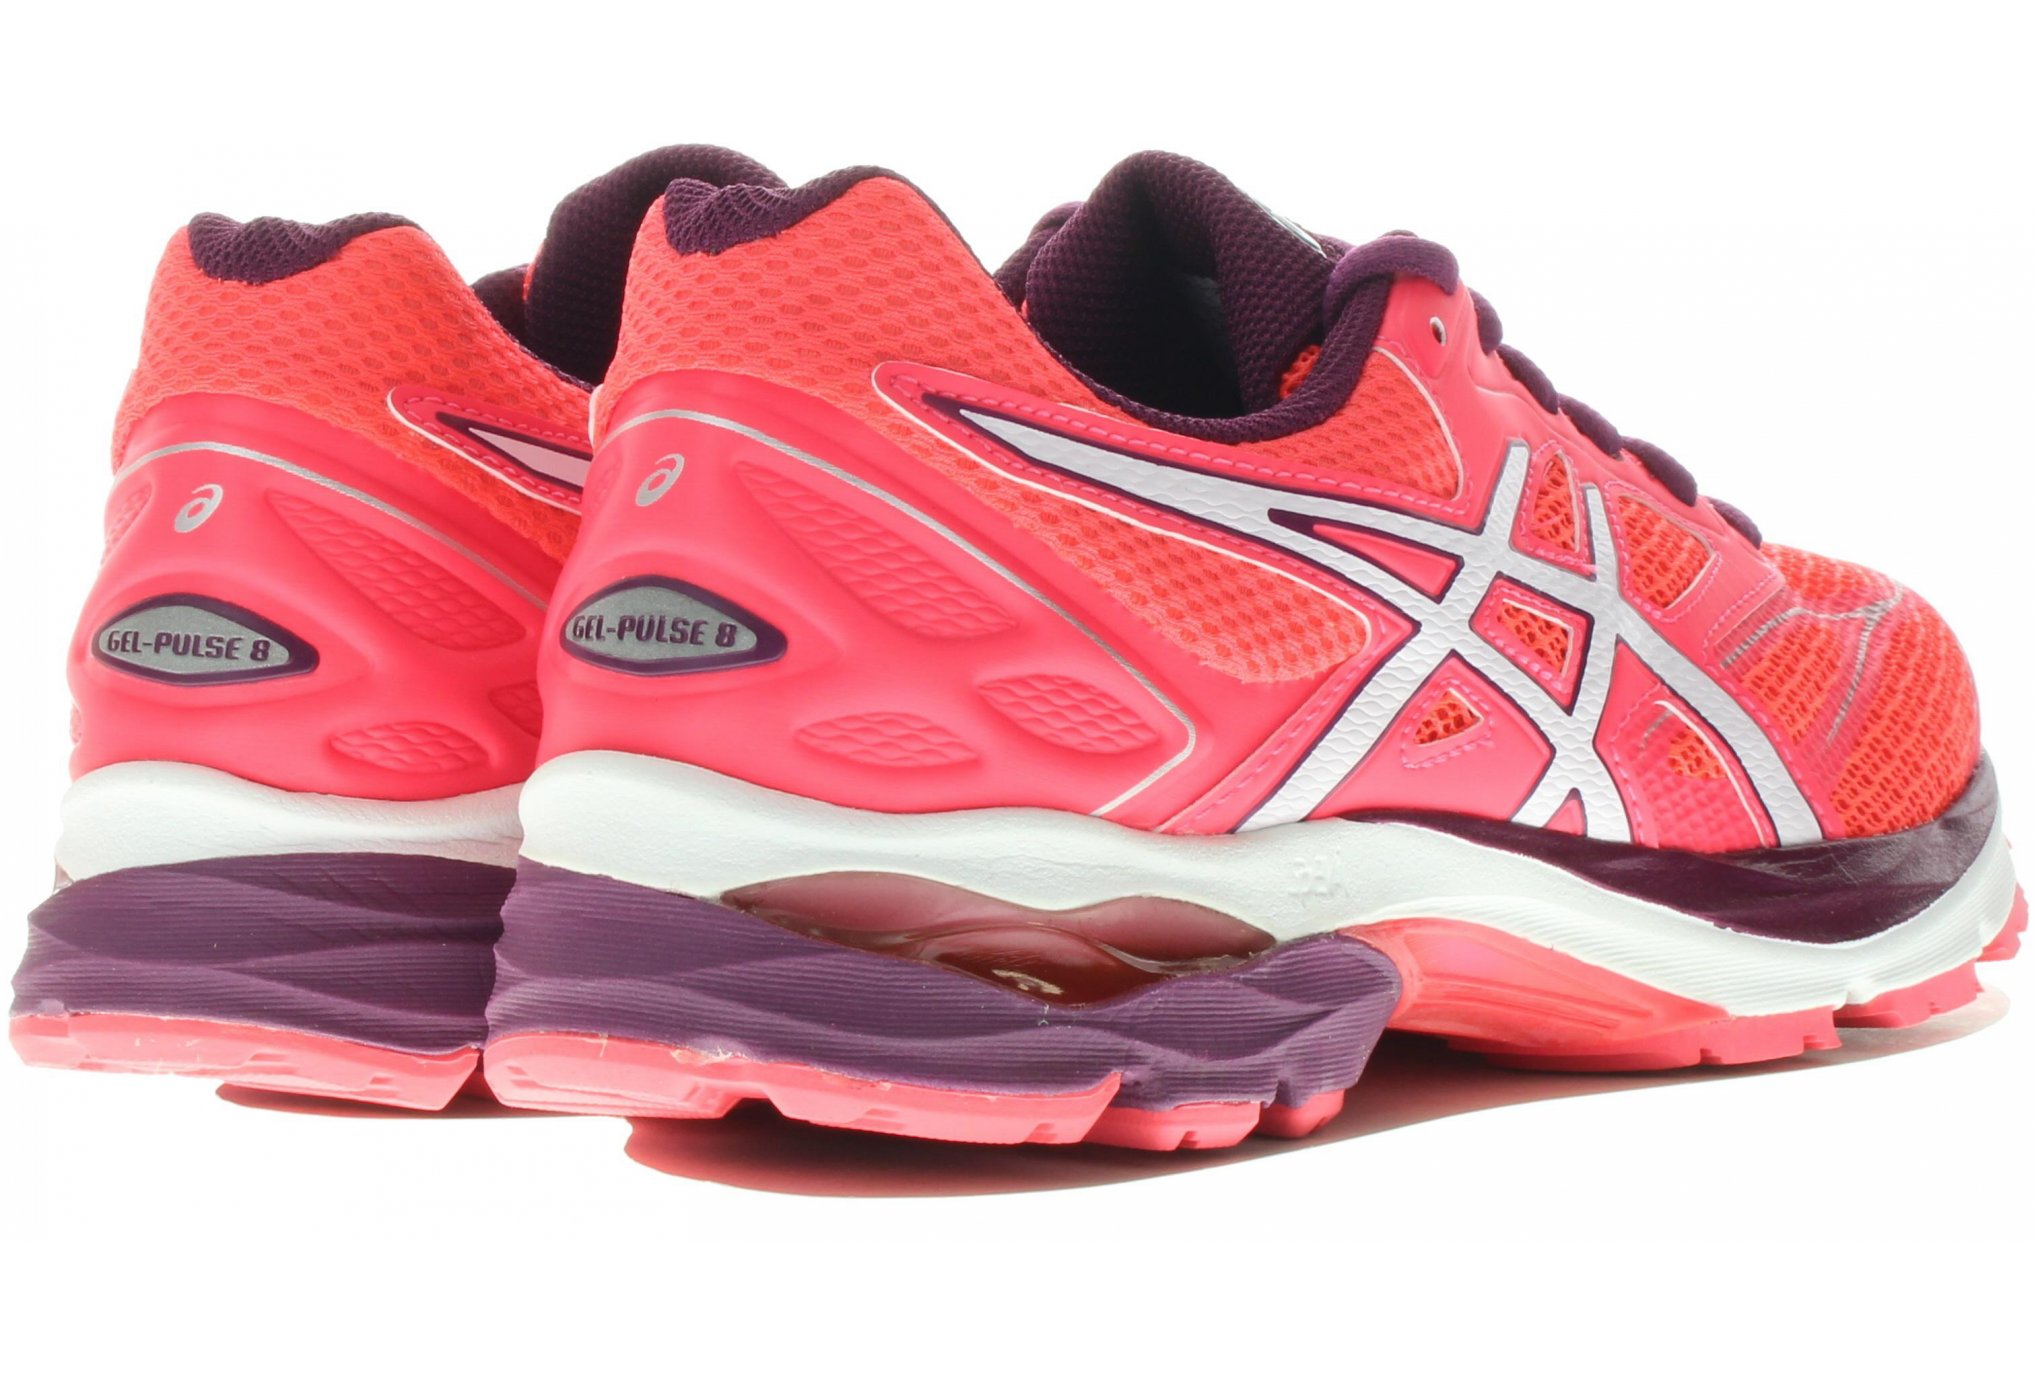 Asics Gel Pulse 8 W Pas Cher Chaussures Running Femme Running Route And Chemin En Promo 